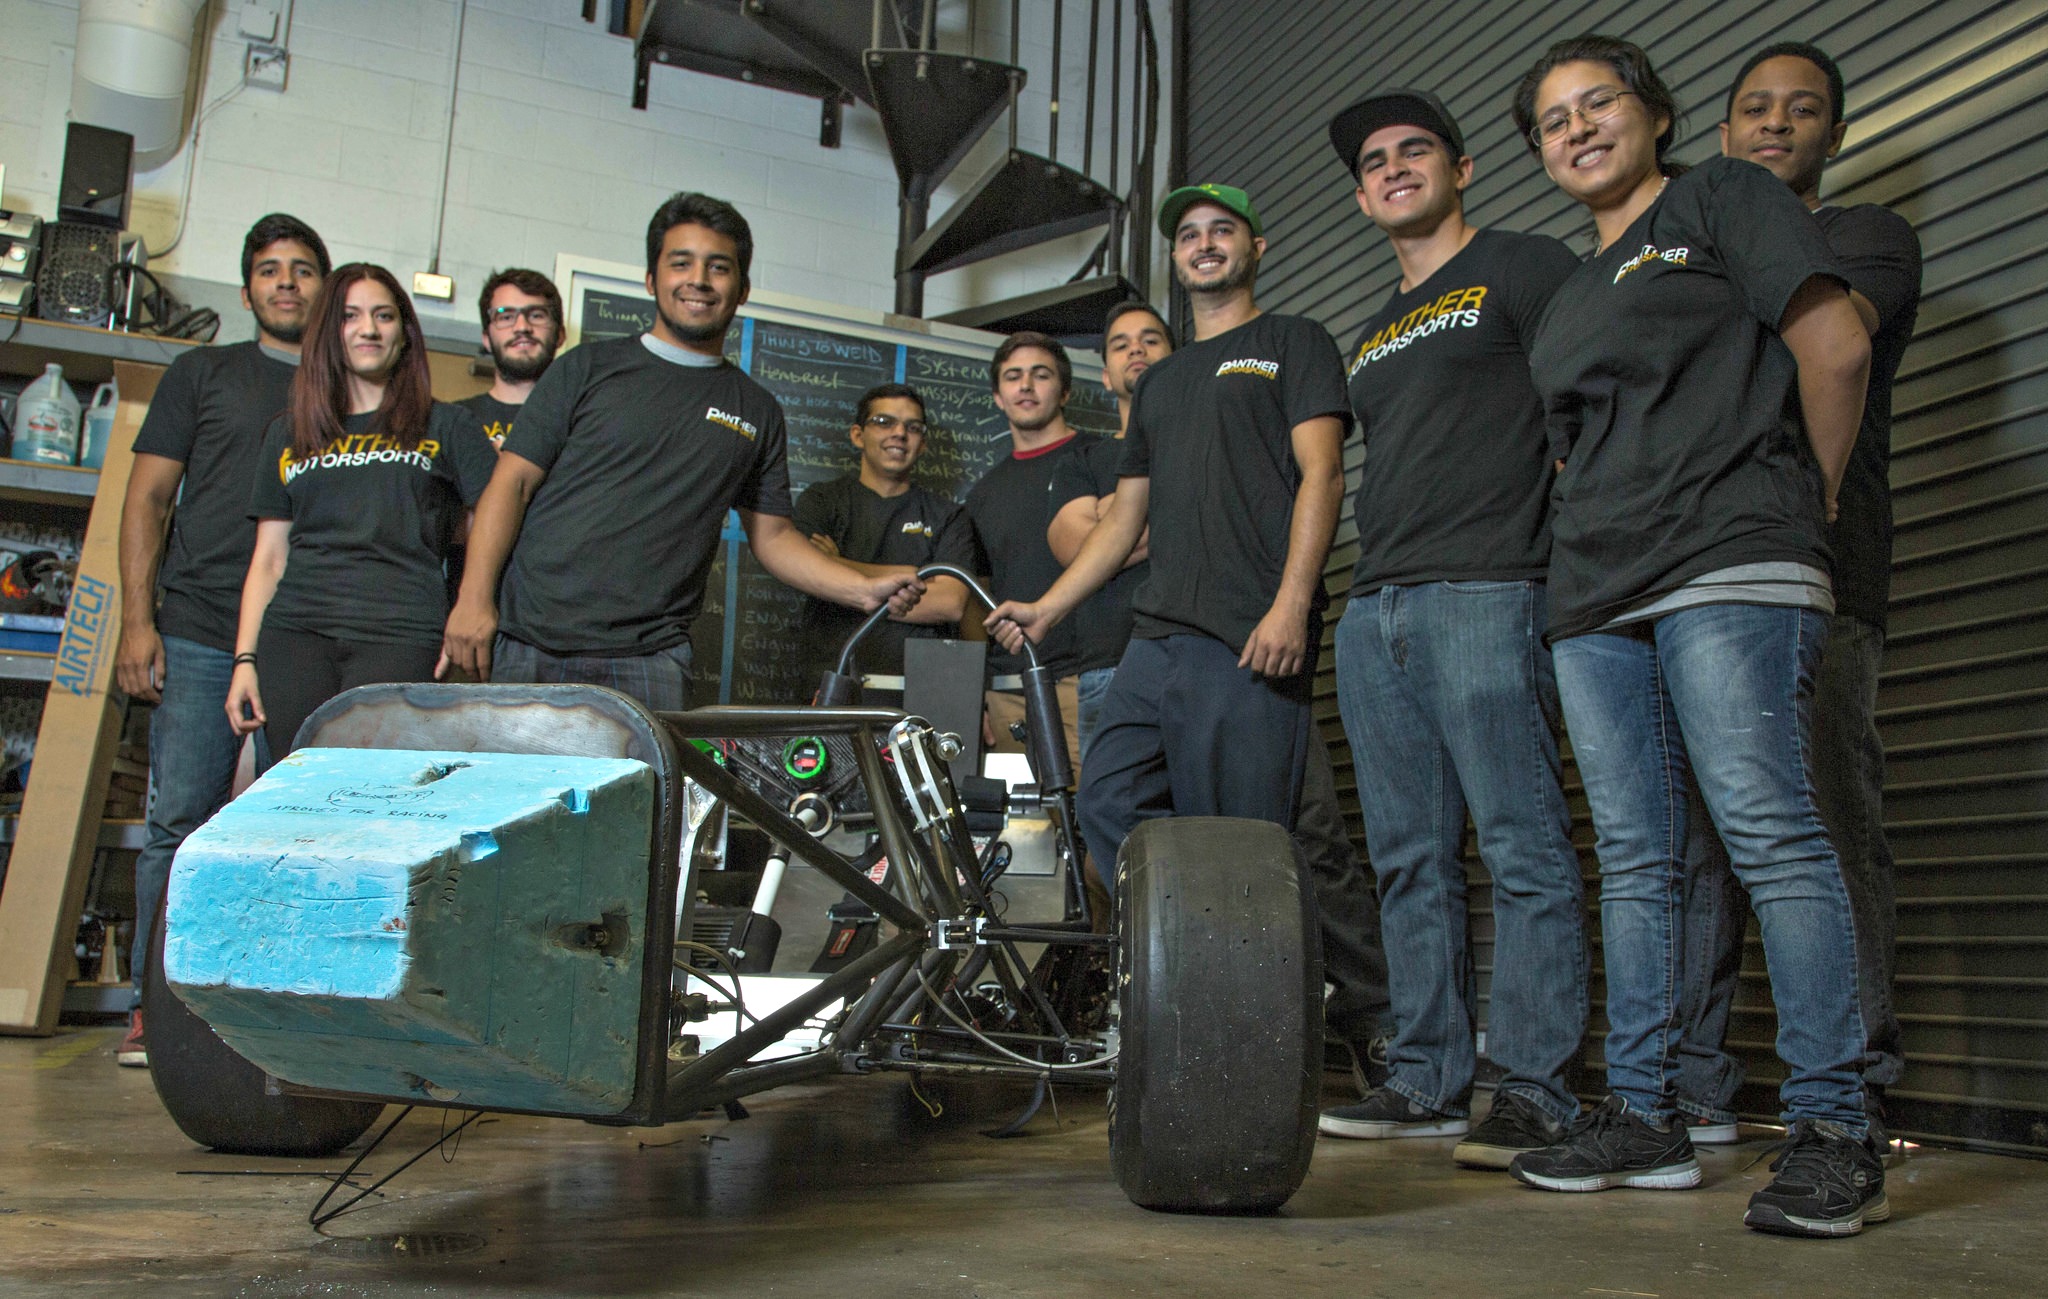 The FIU-SAE team with their nearly completed race car, which they will be taking up to Michigan in May for the 2015 Formula SAE Michigan competition.